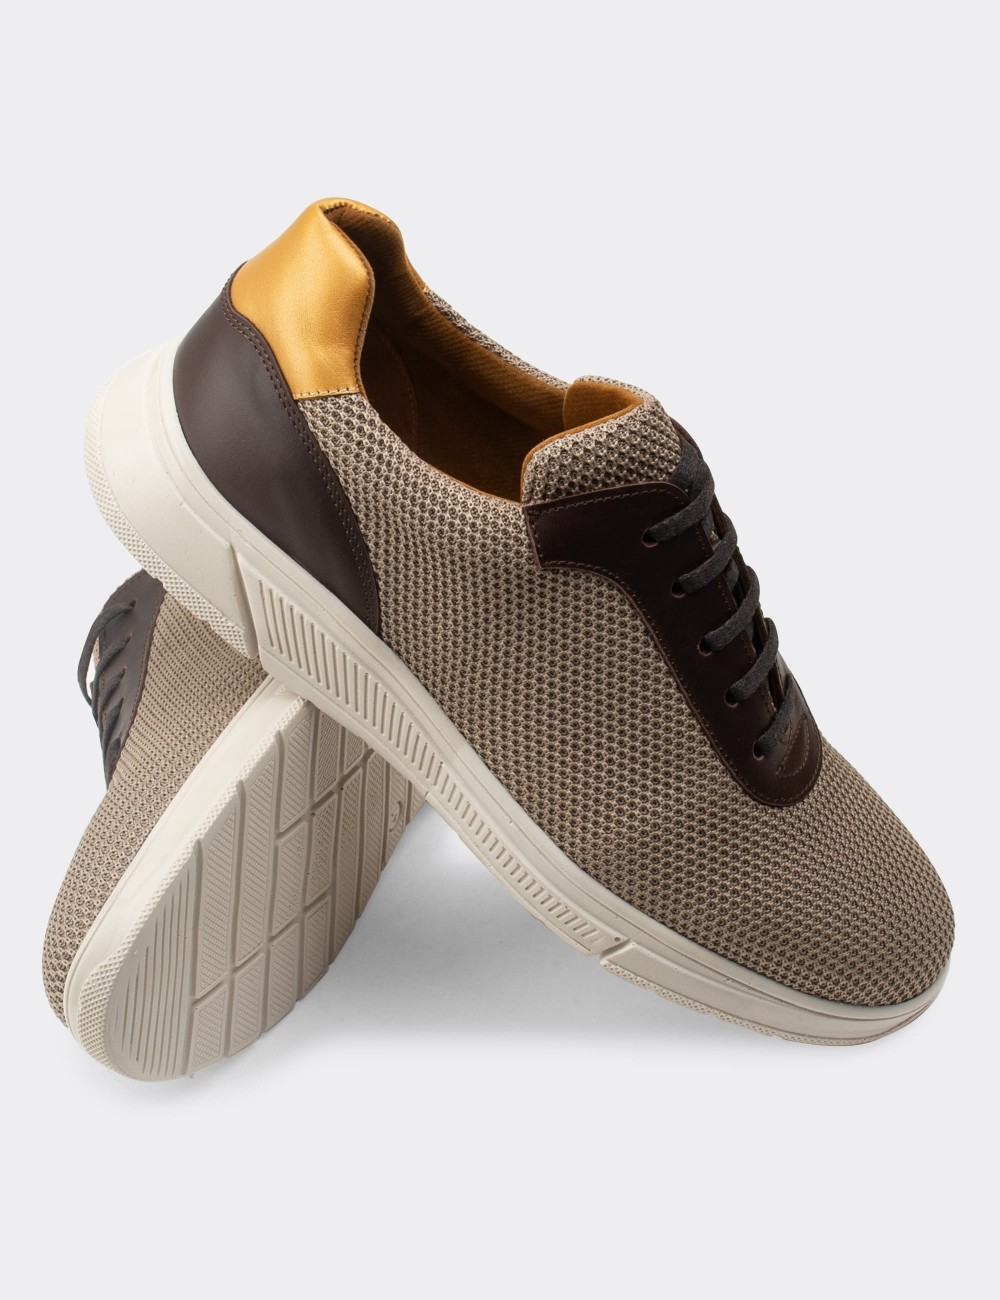 Beige Textile Sneakers - 01879MBEJC01